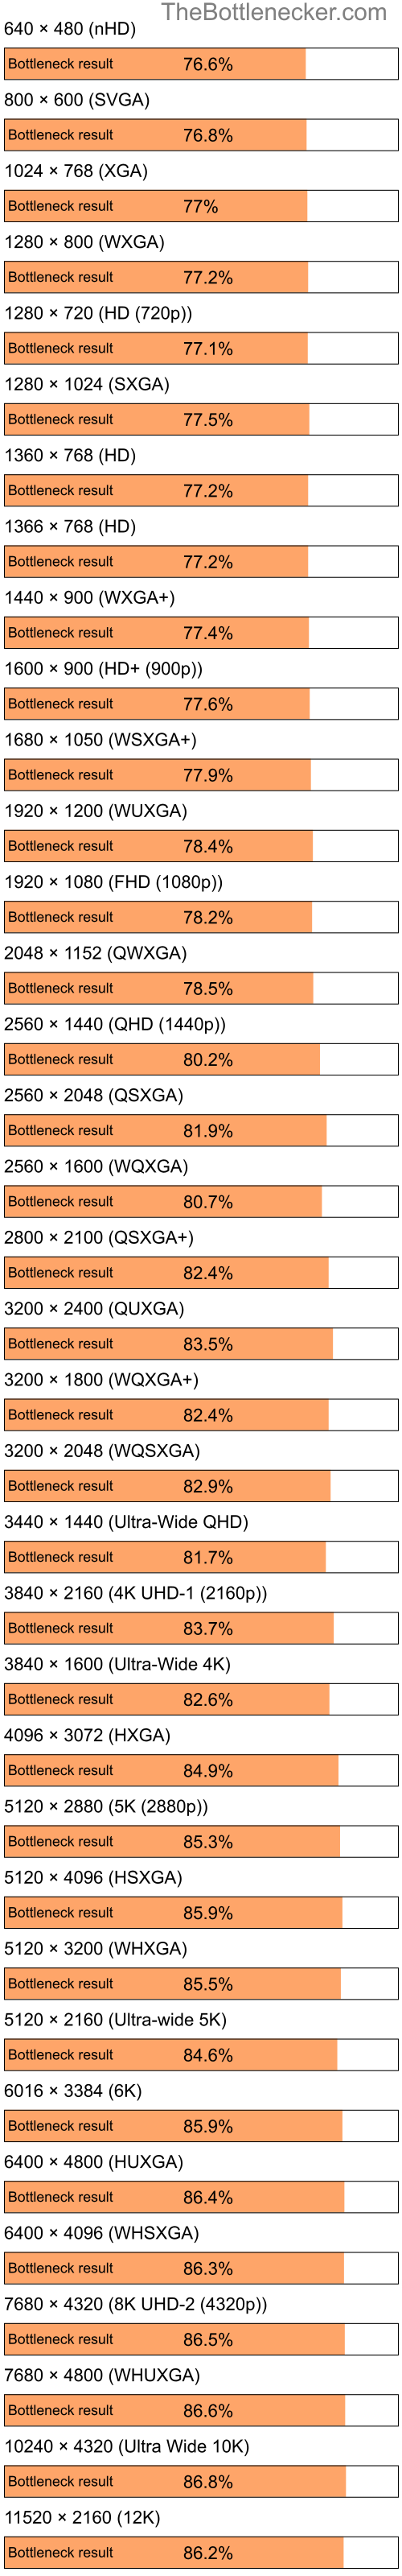 Bottleneck results by resolution for Intel Pentium 4 and NVIDIA GeForce Go 7200 in Graphic Card Intense Tasks